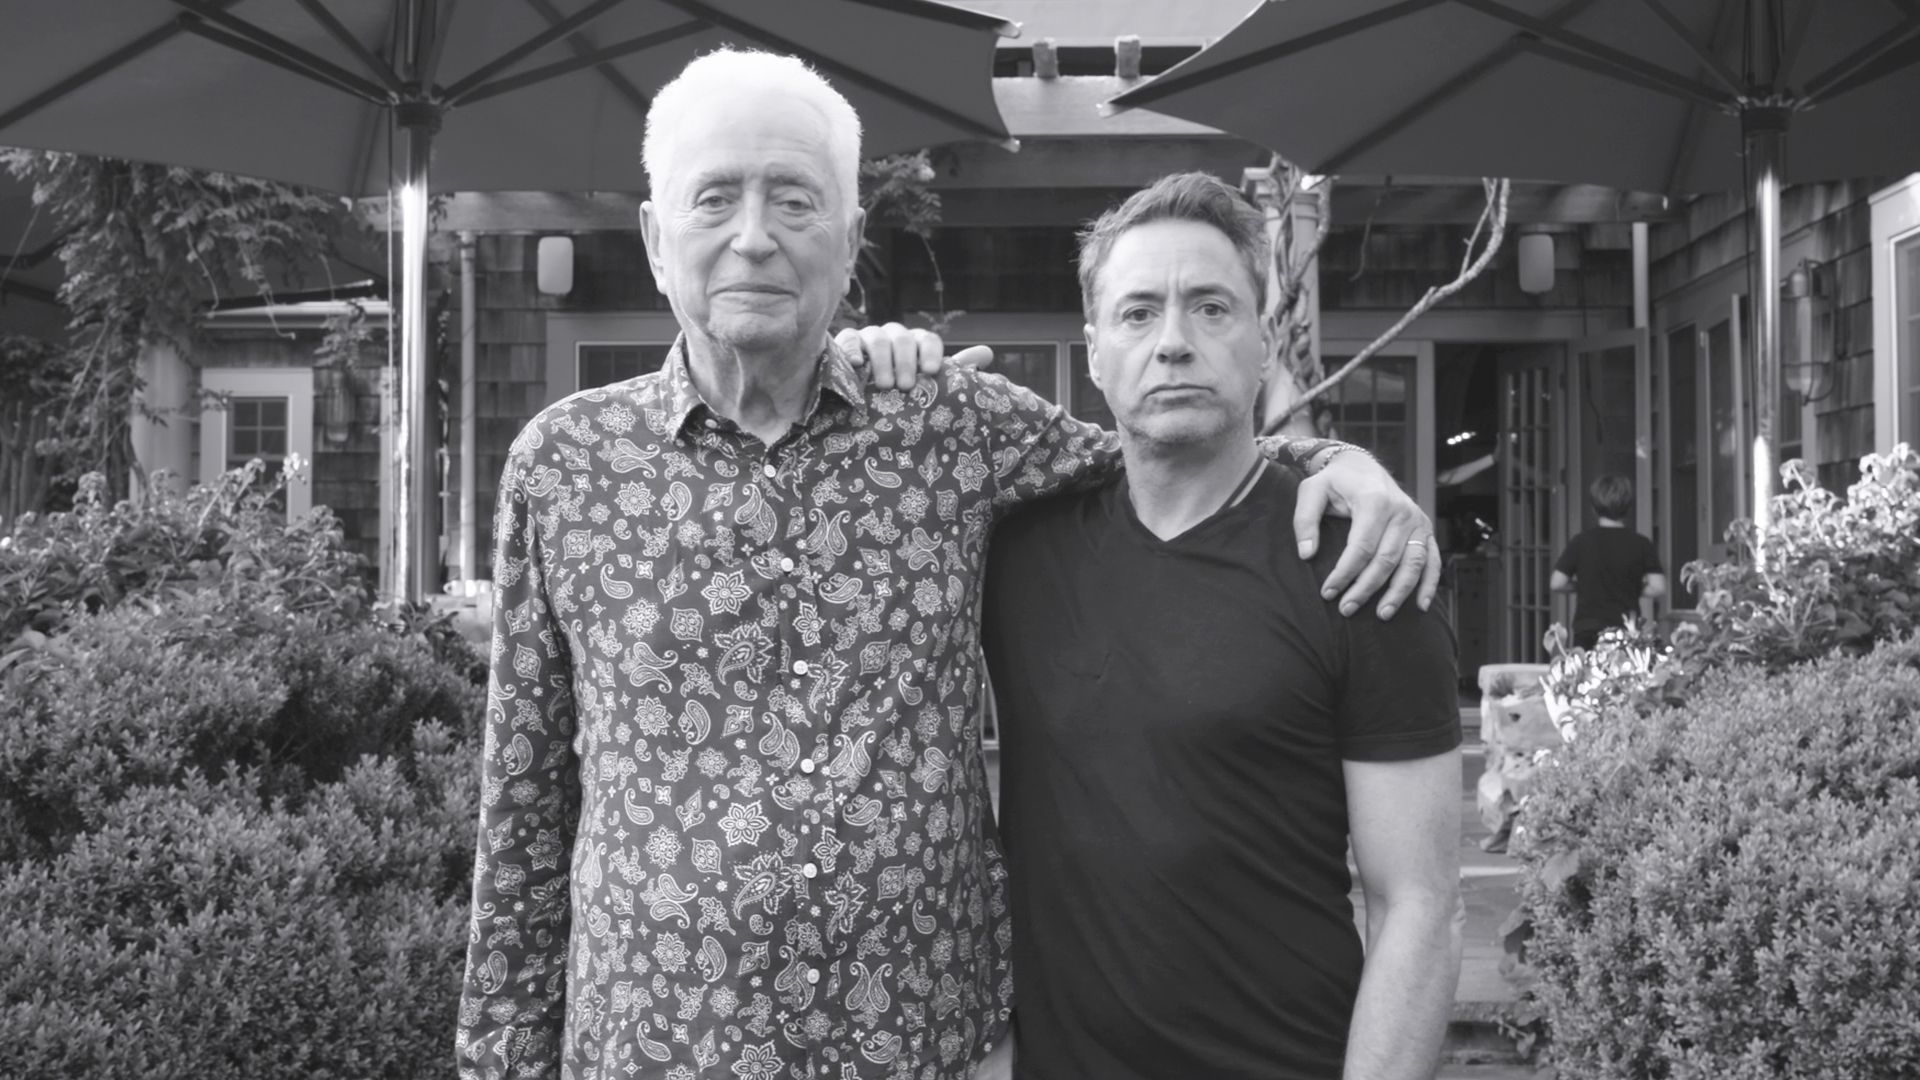 Robert Downey Jr. on New Documentary 'Sr.' Profiling His Father